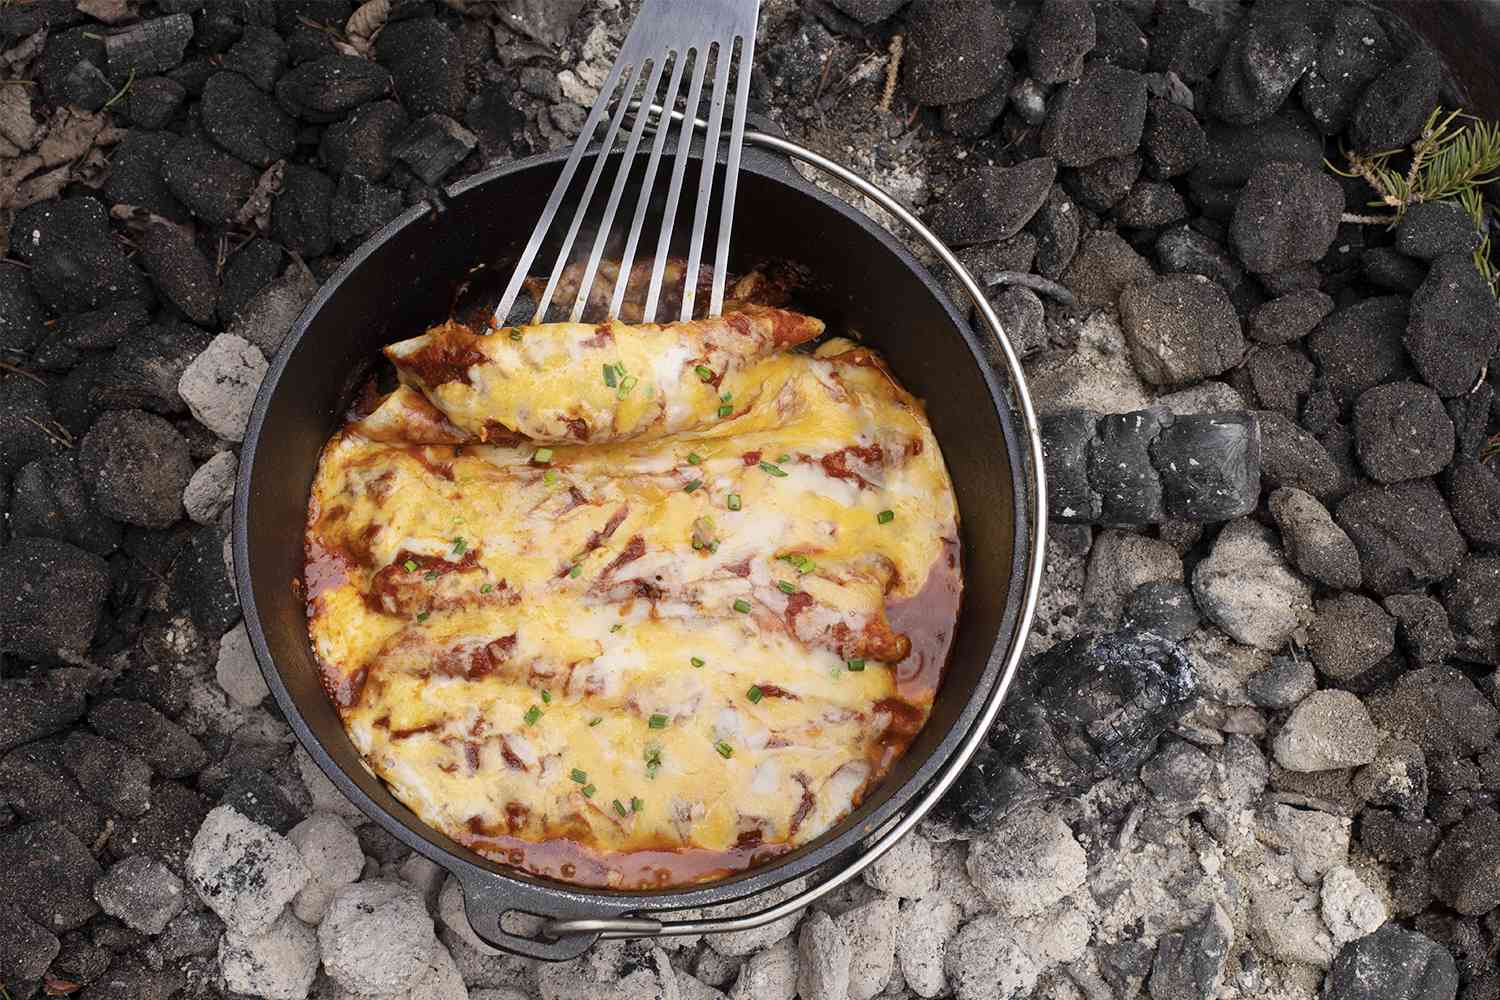  Camp Chef Classic 10-inch Dutch Oven Review